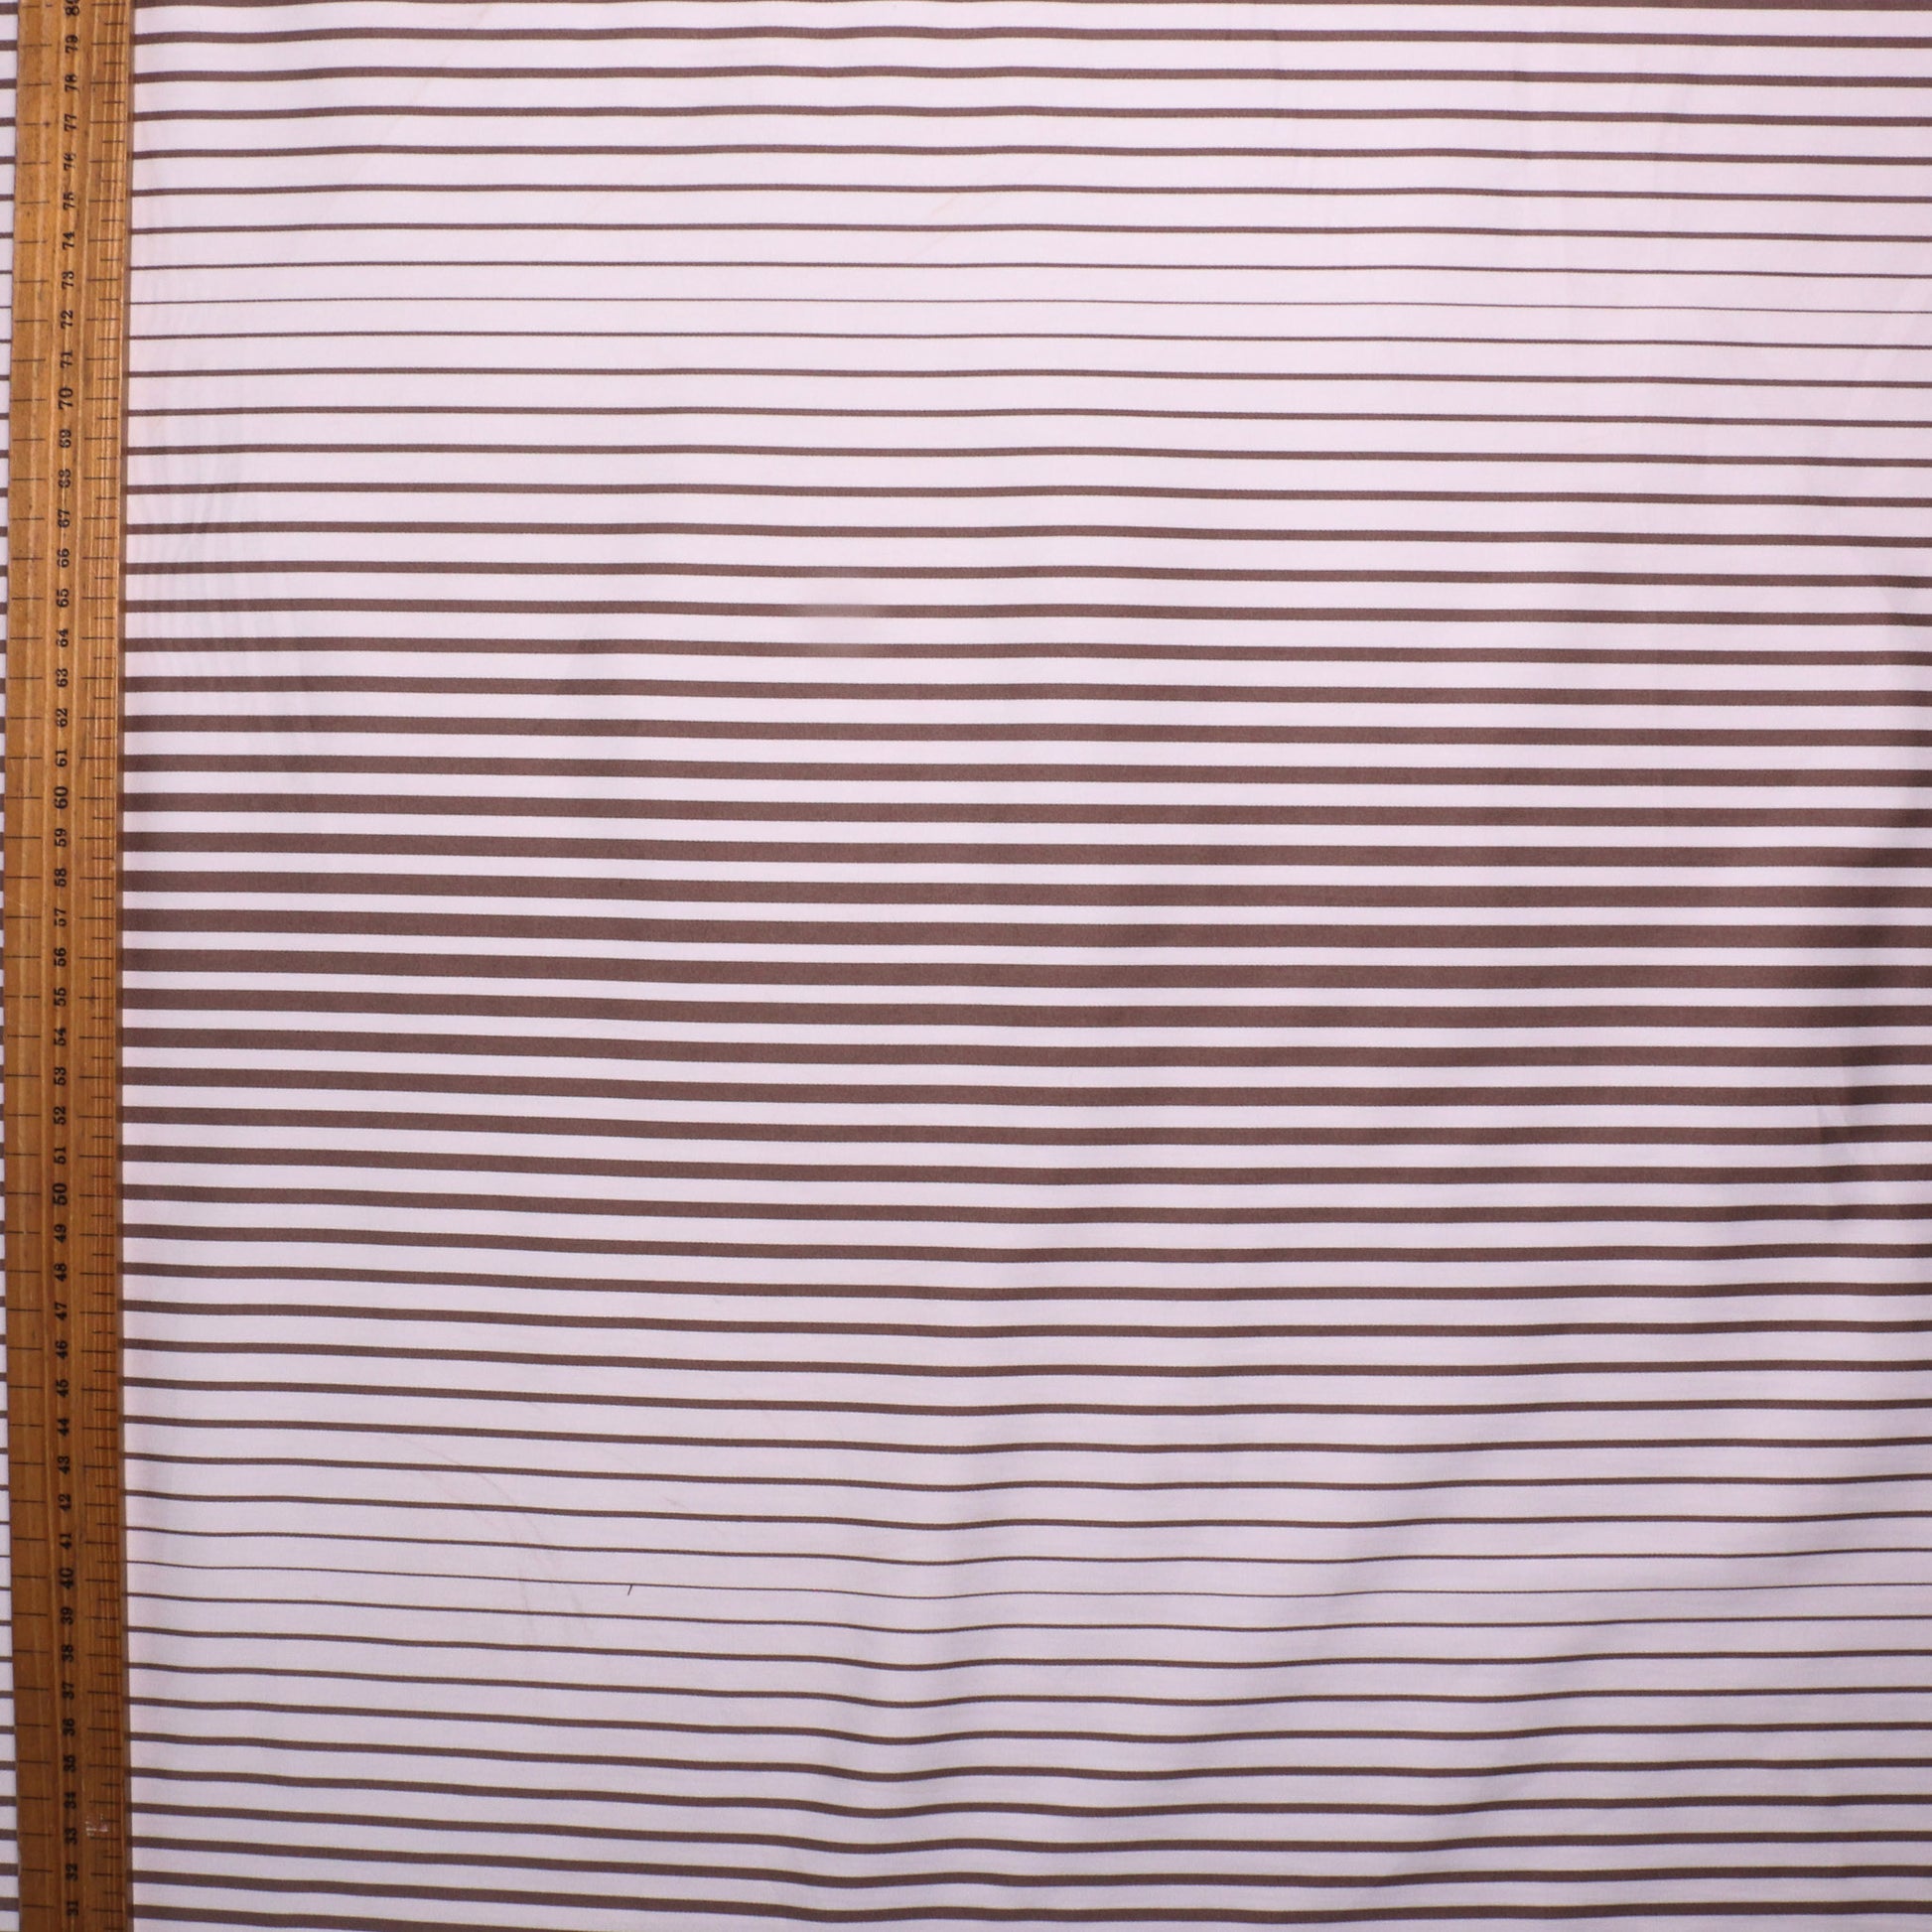 metre cotton sateen dressmaking fabric with white and beige stripes